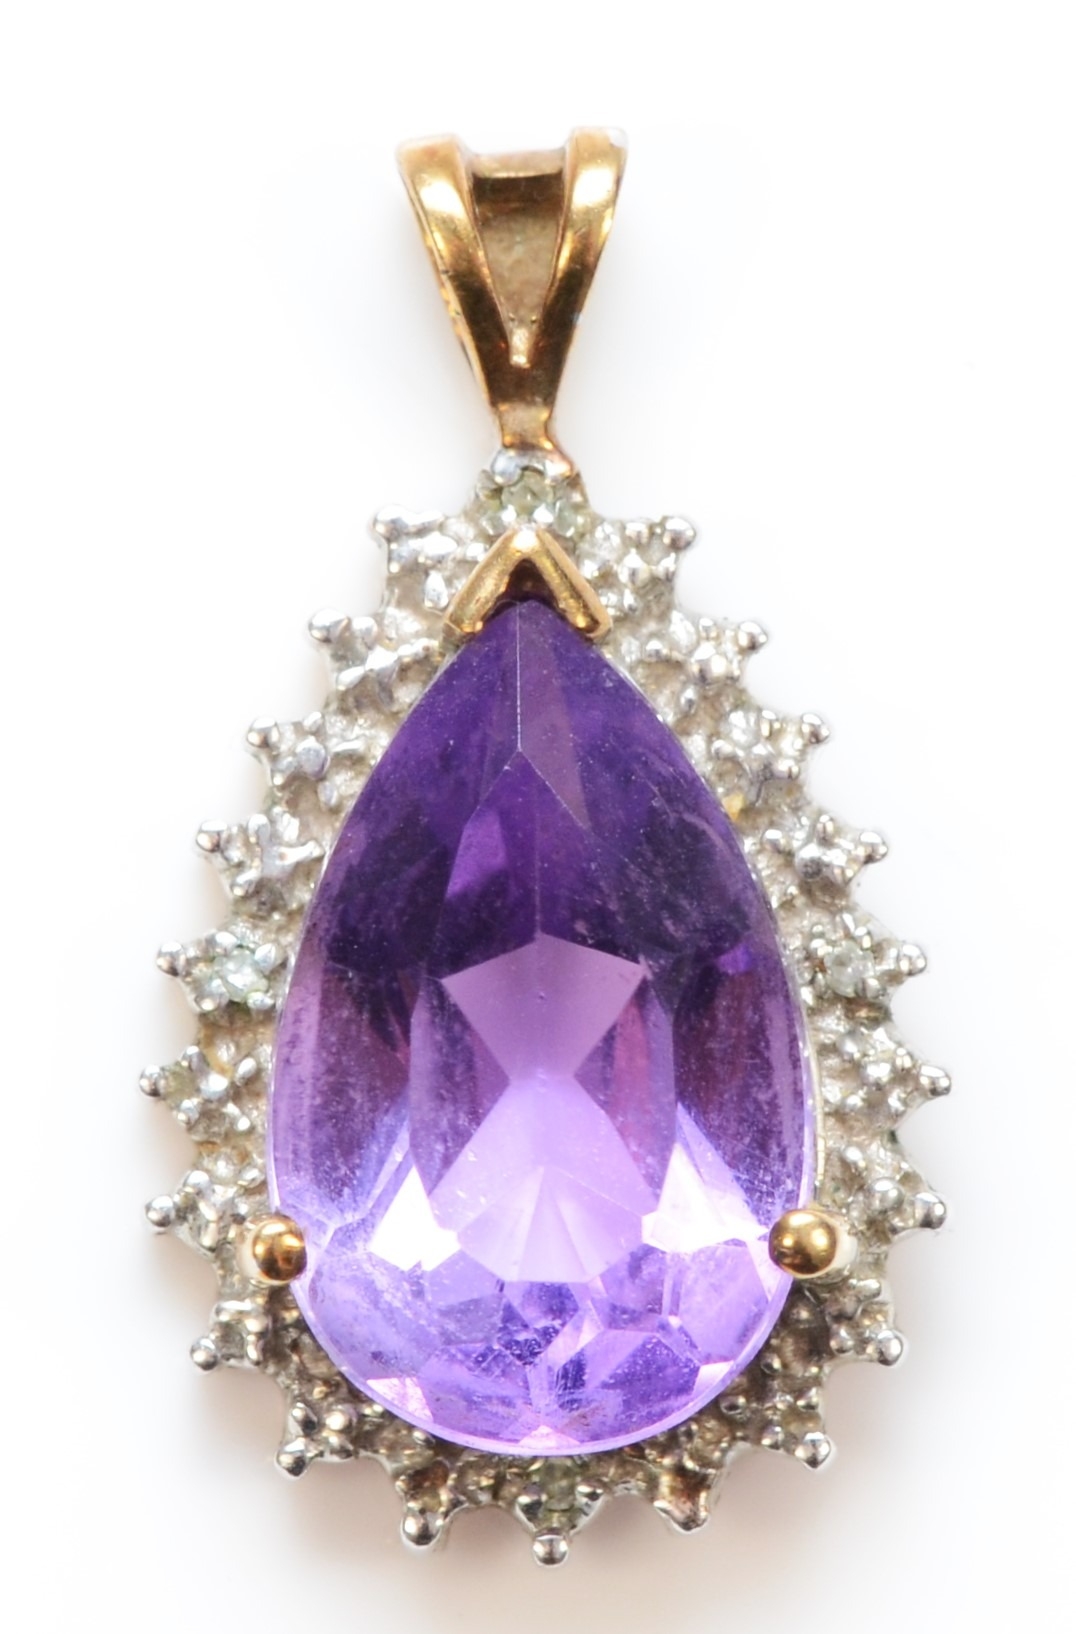 A 9ct gold amethyst and illusion set diamond pendent, 23 x 13mm, 2.5gm.